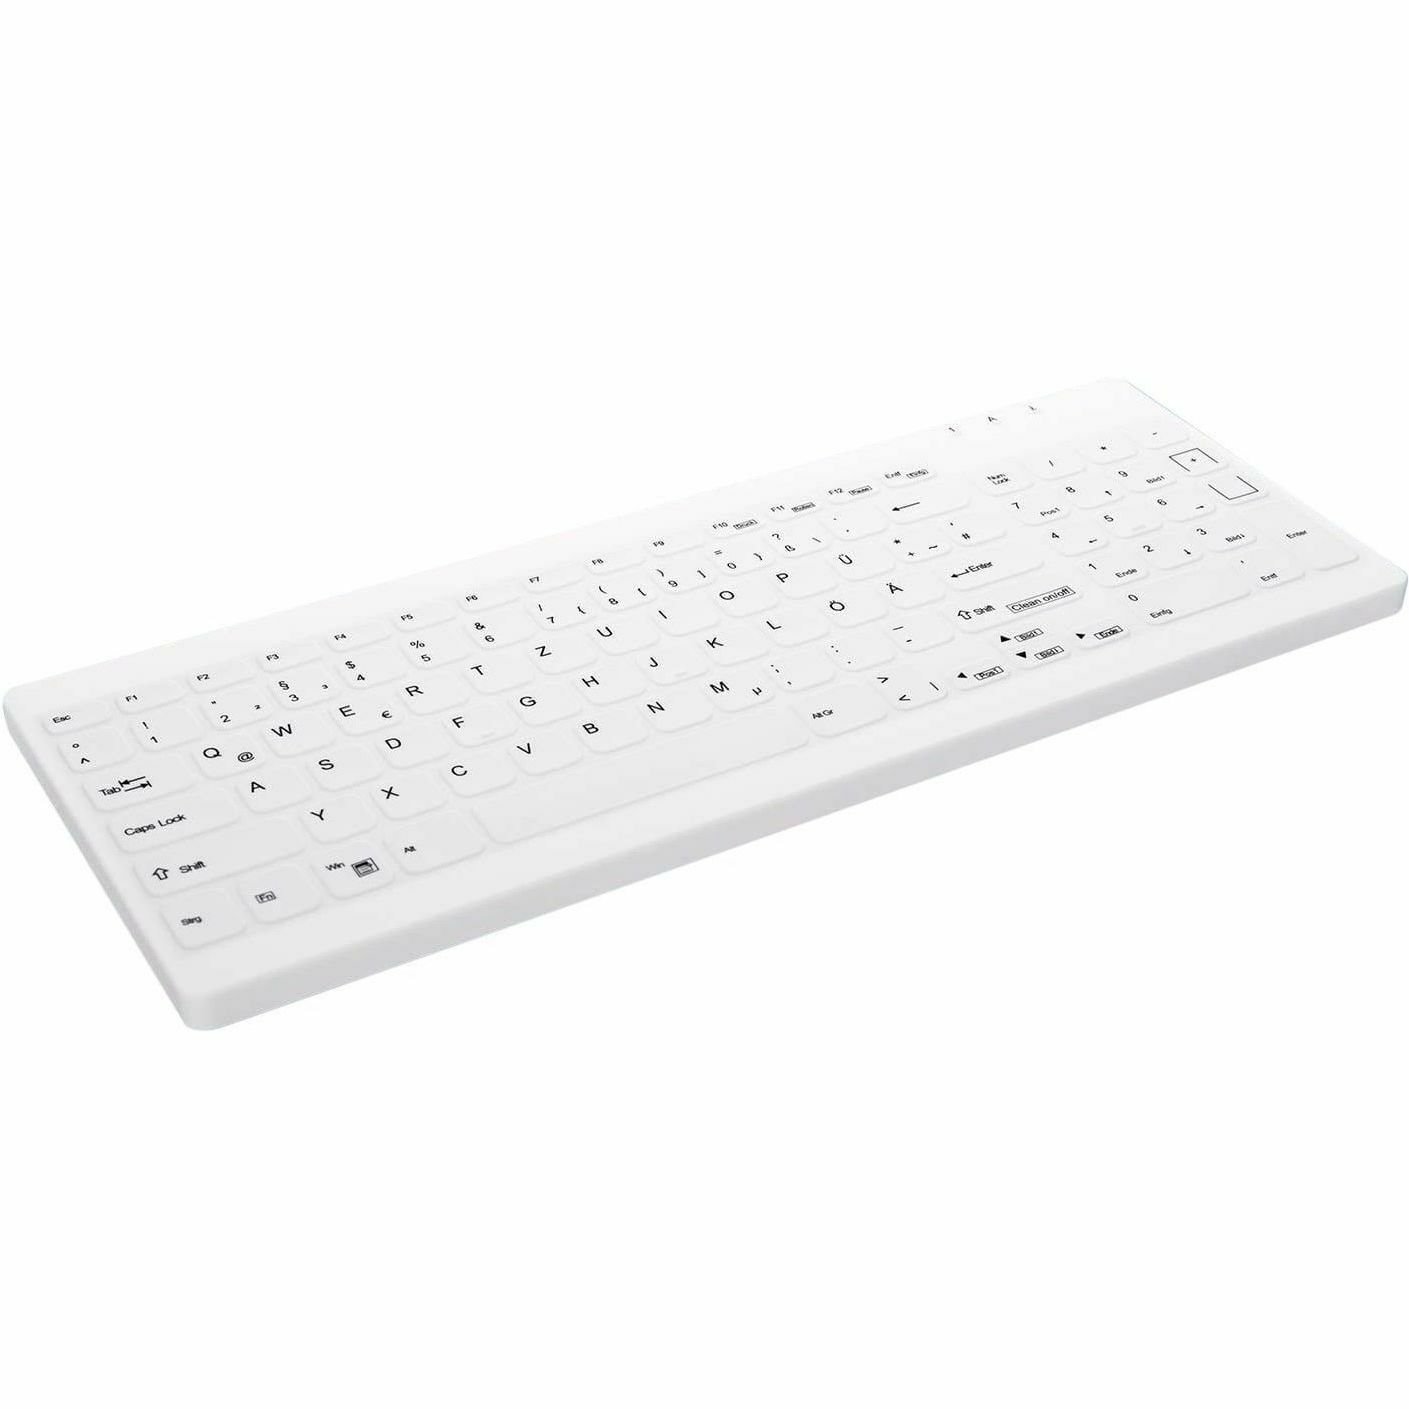 Active Key Keyboard - Cable Connectivity - USB 1.1 Type A Interface - White